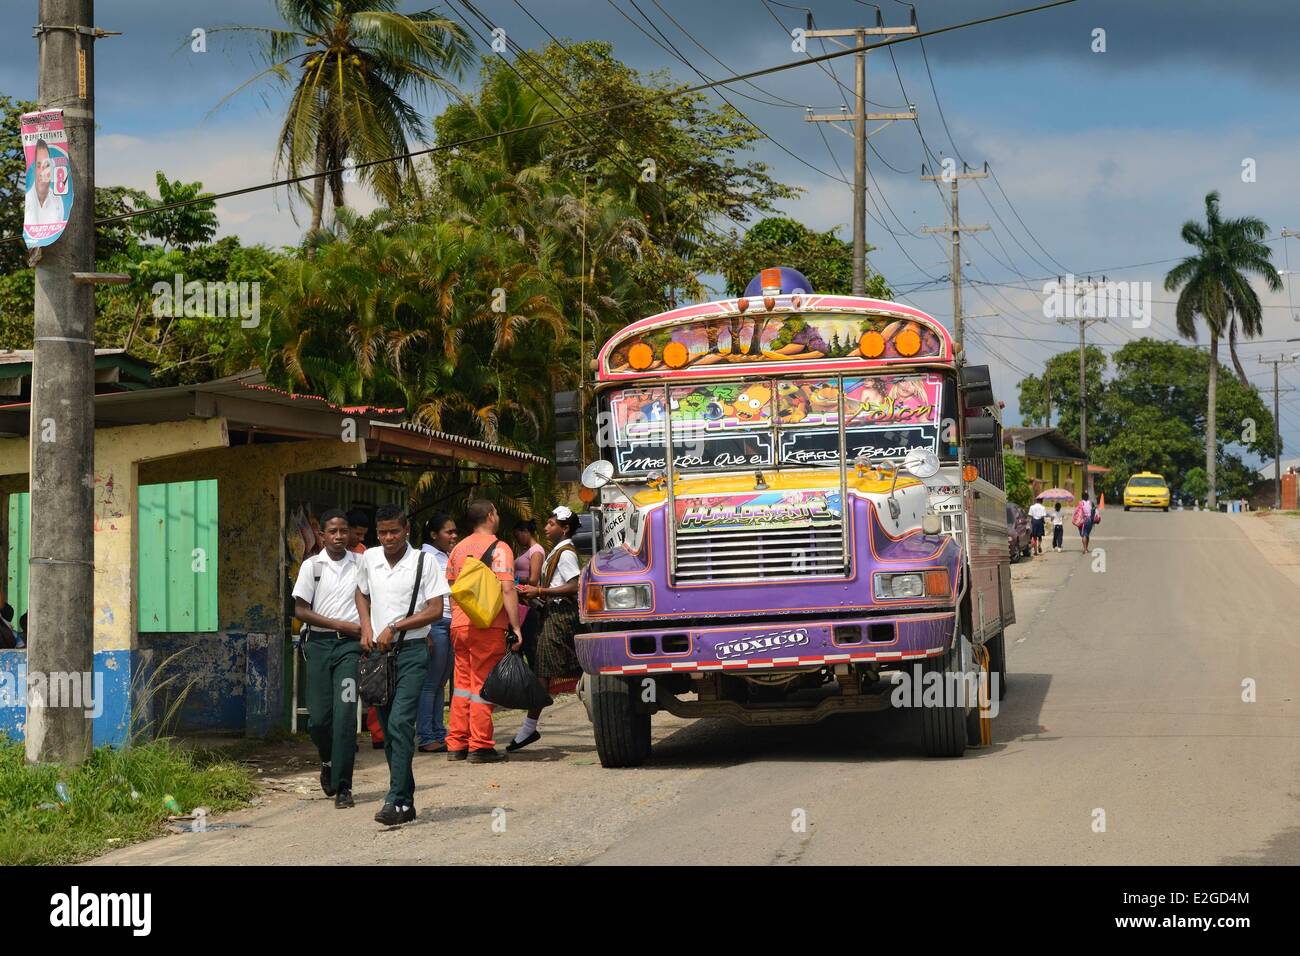 Panama Colon province bus called Diablo Rojo (Red Devil) covered with garish paintings Stock Photo